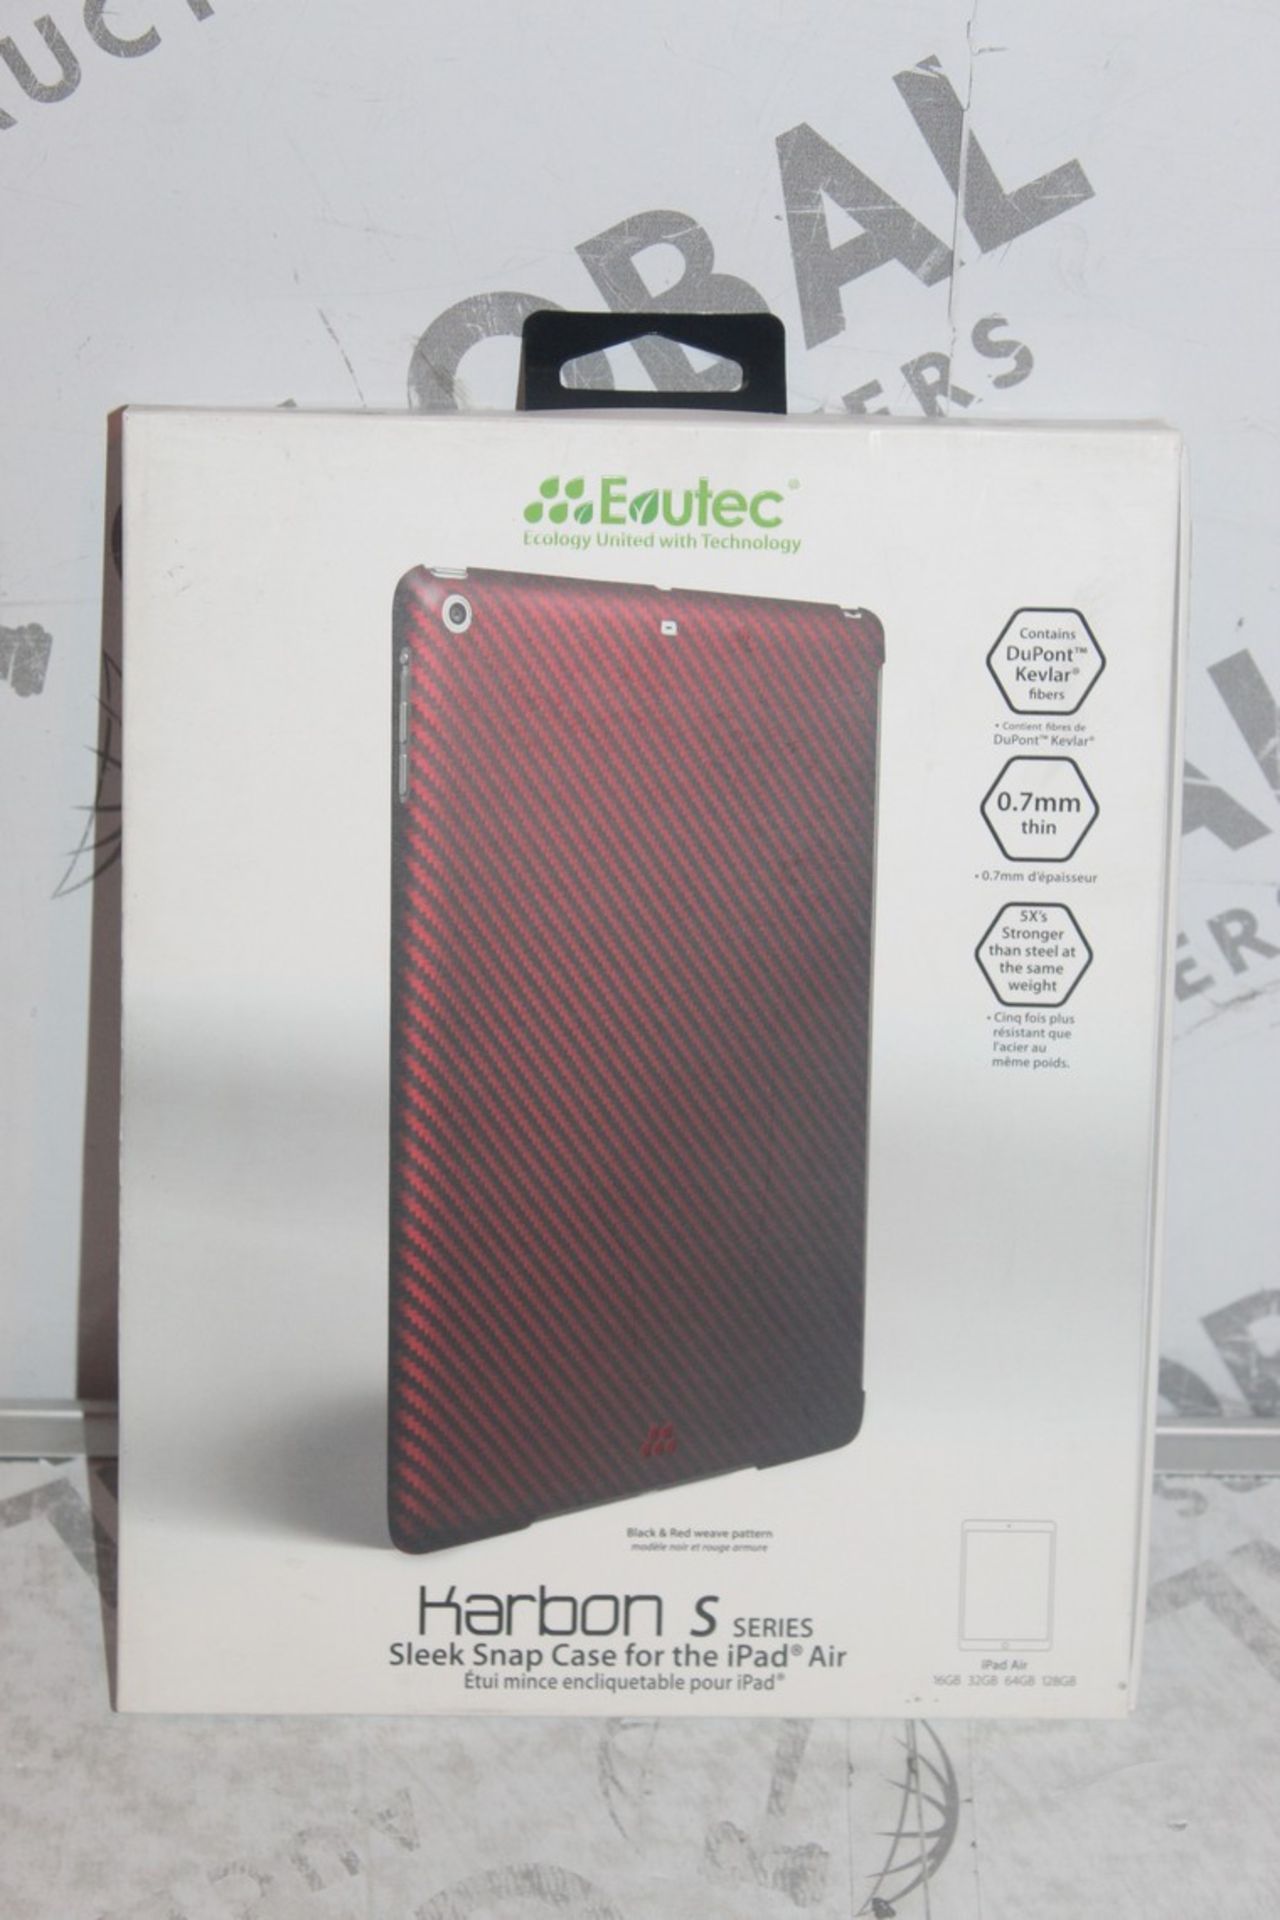 Boxed Brand New Evutec Carbon S Series iPad Air Case RRP £55